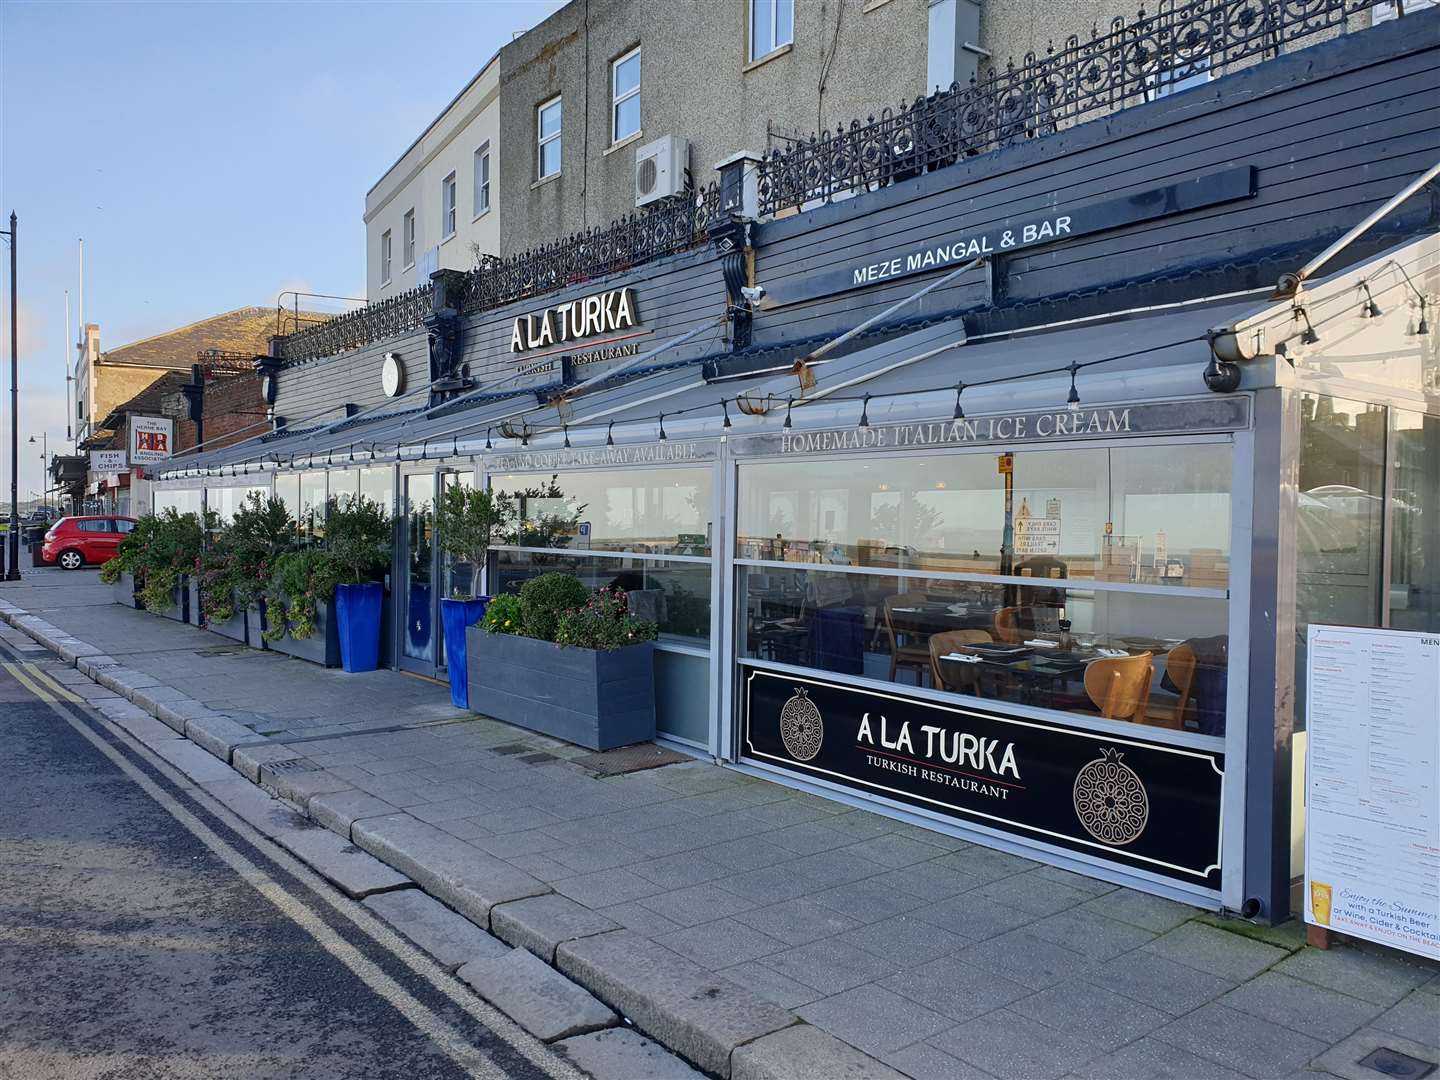 The glass panels enclosing the outside seating area were erected in 2019 without planning permission